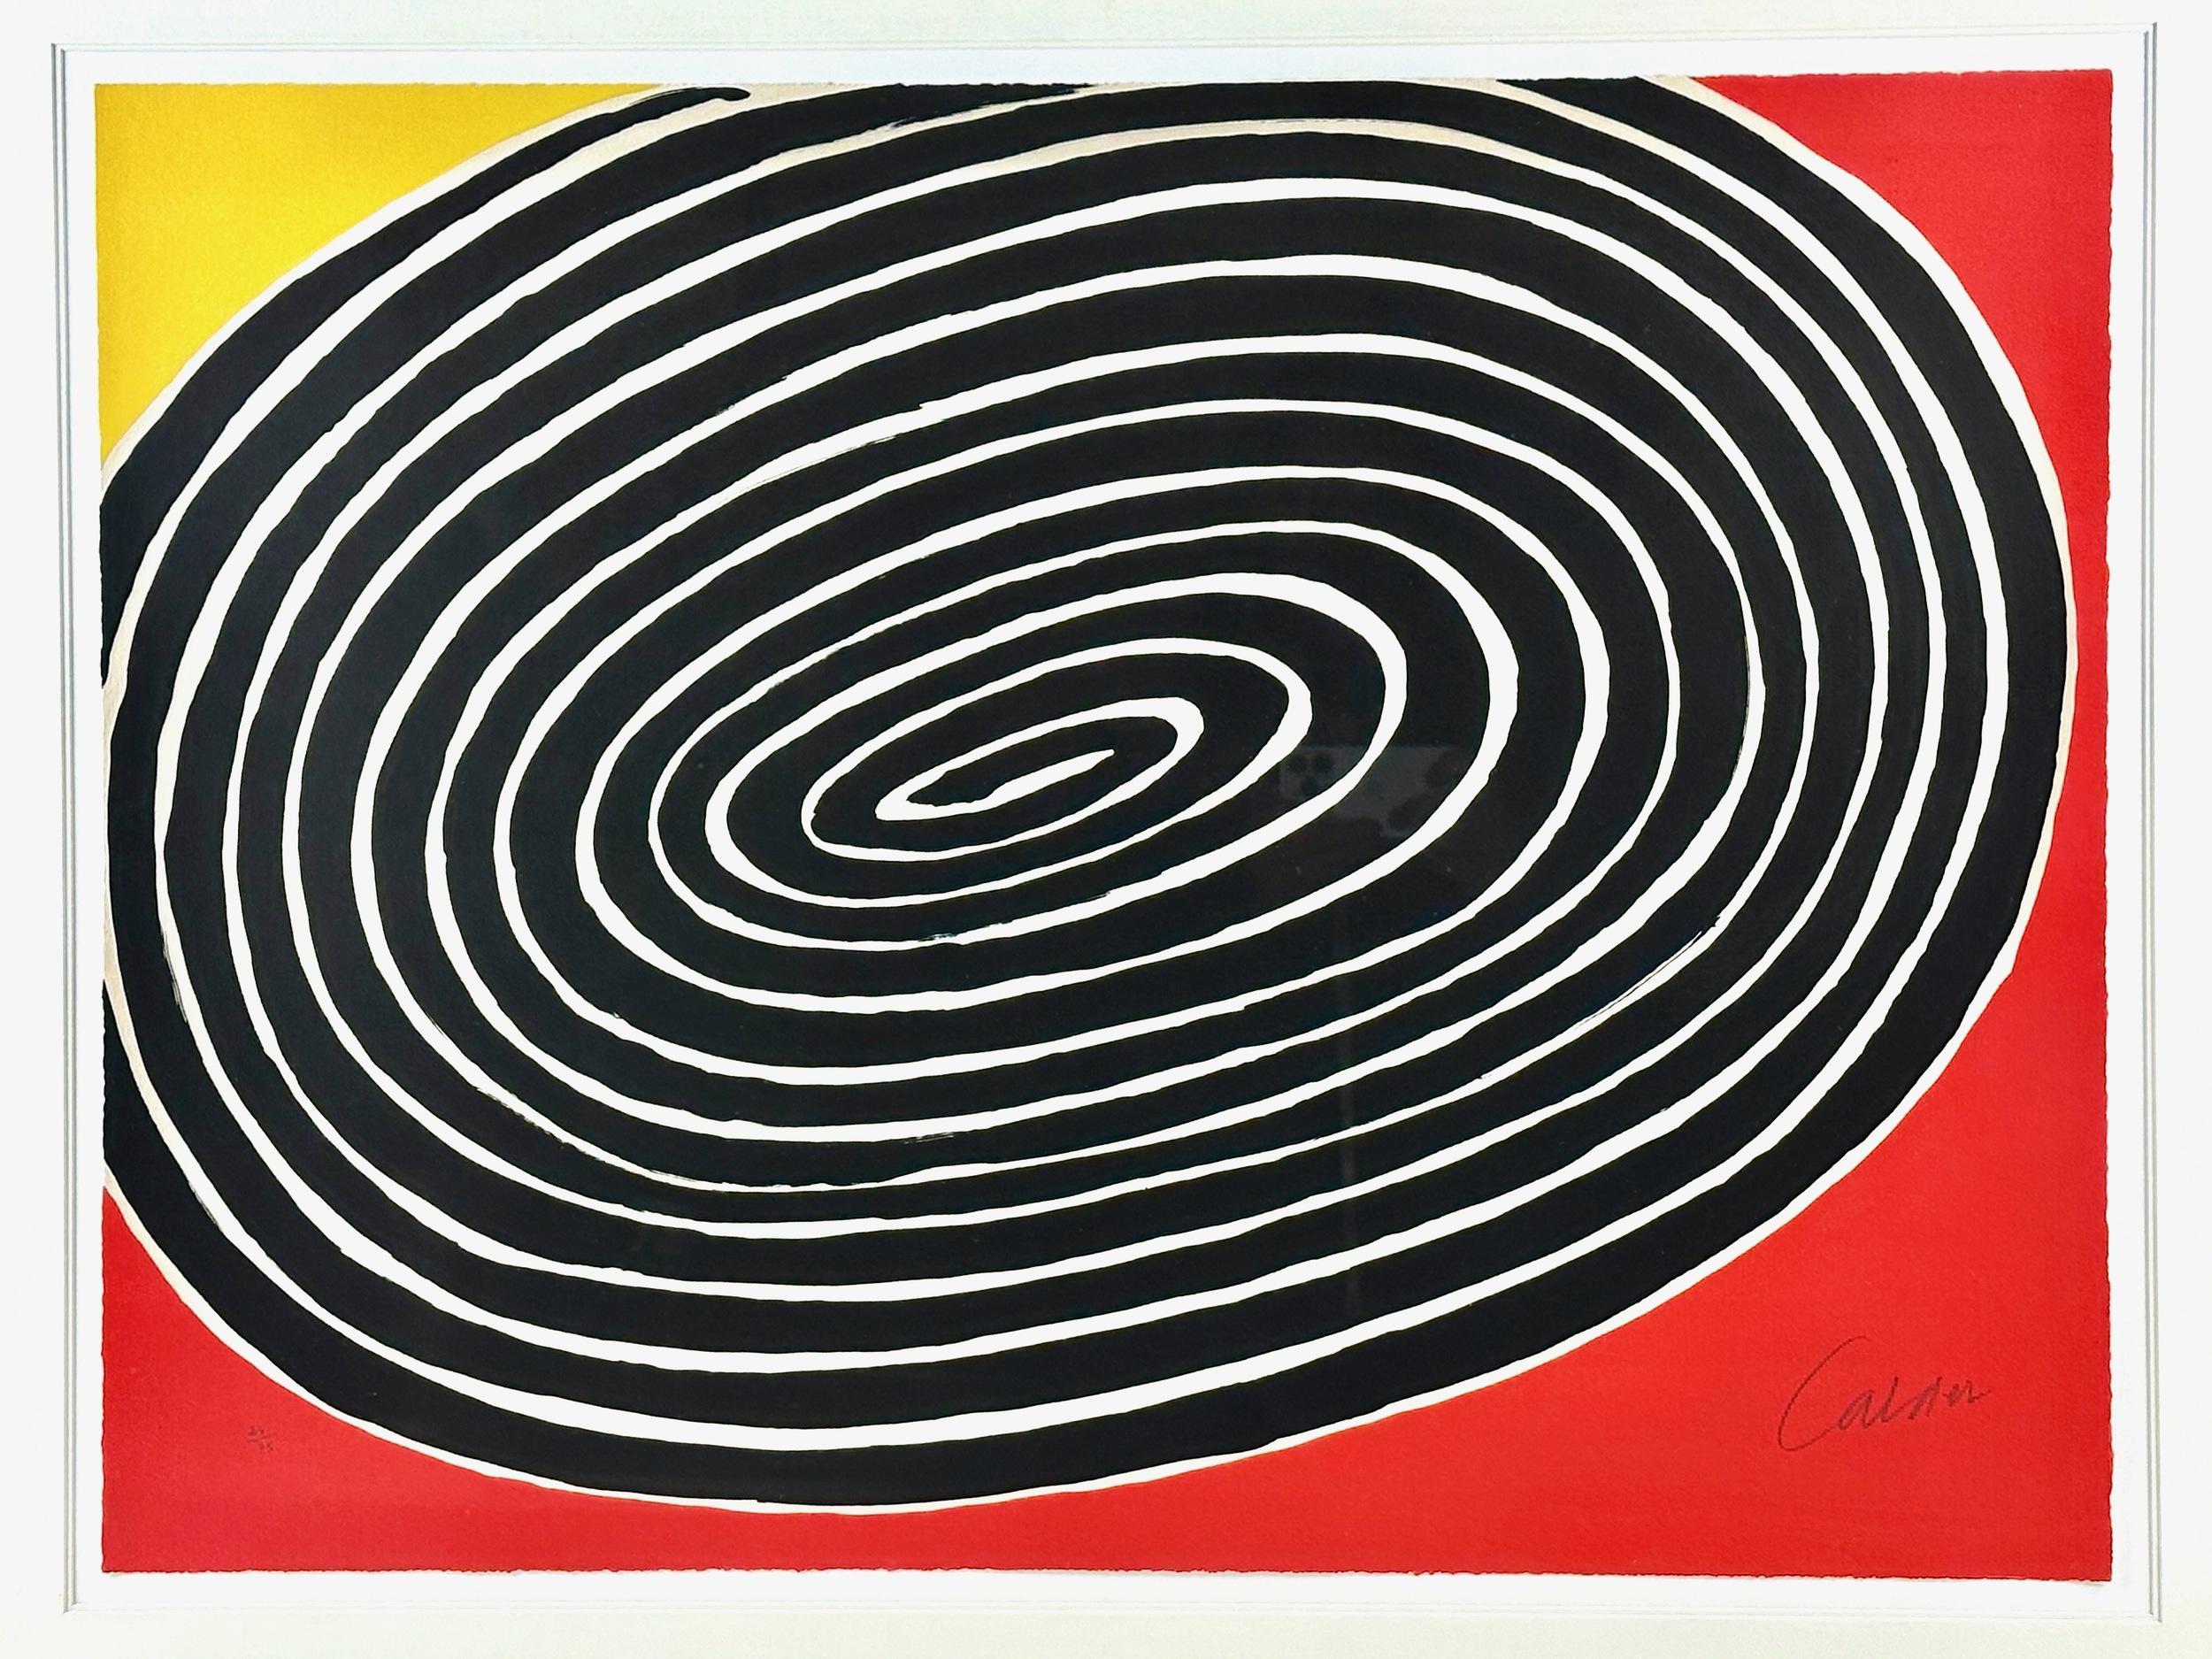 Petite Spirale, 1976

Lithograph in colors, on wove paper, the full sheet

Published by Maeght Editeur, Paris

21 7/10 × 30 3/5 inches (55.2 × 77.8 cm)

Signed and numbered in pencil, edition of 75 copies 

Professionally framed

Alexander Calder